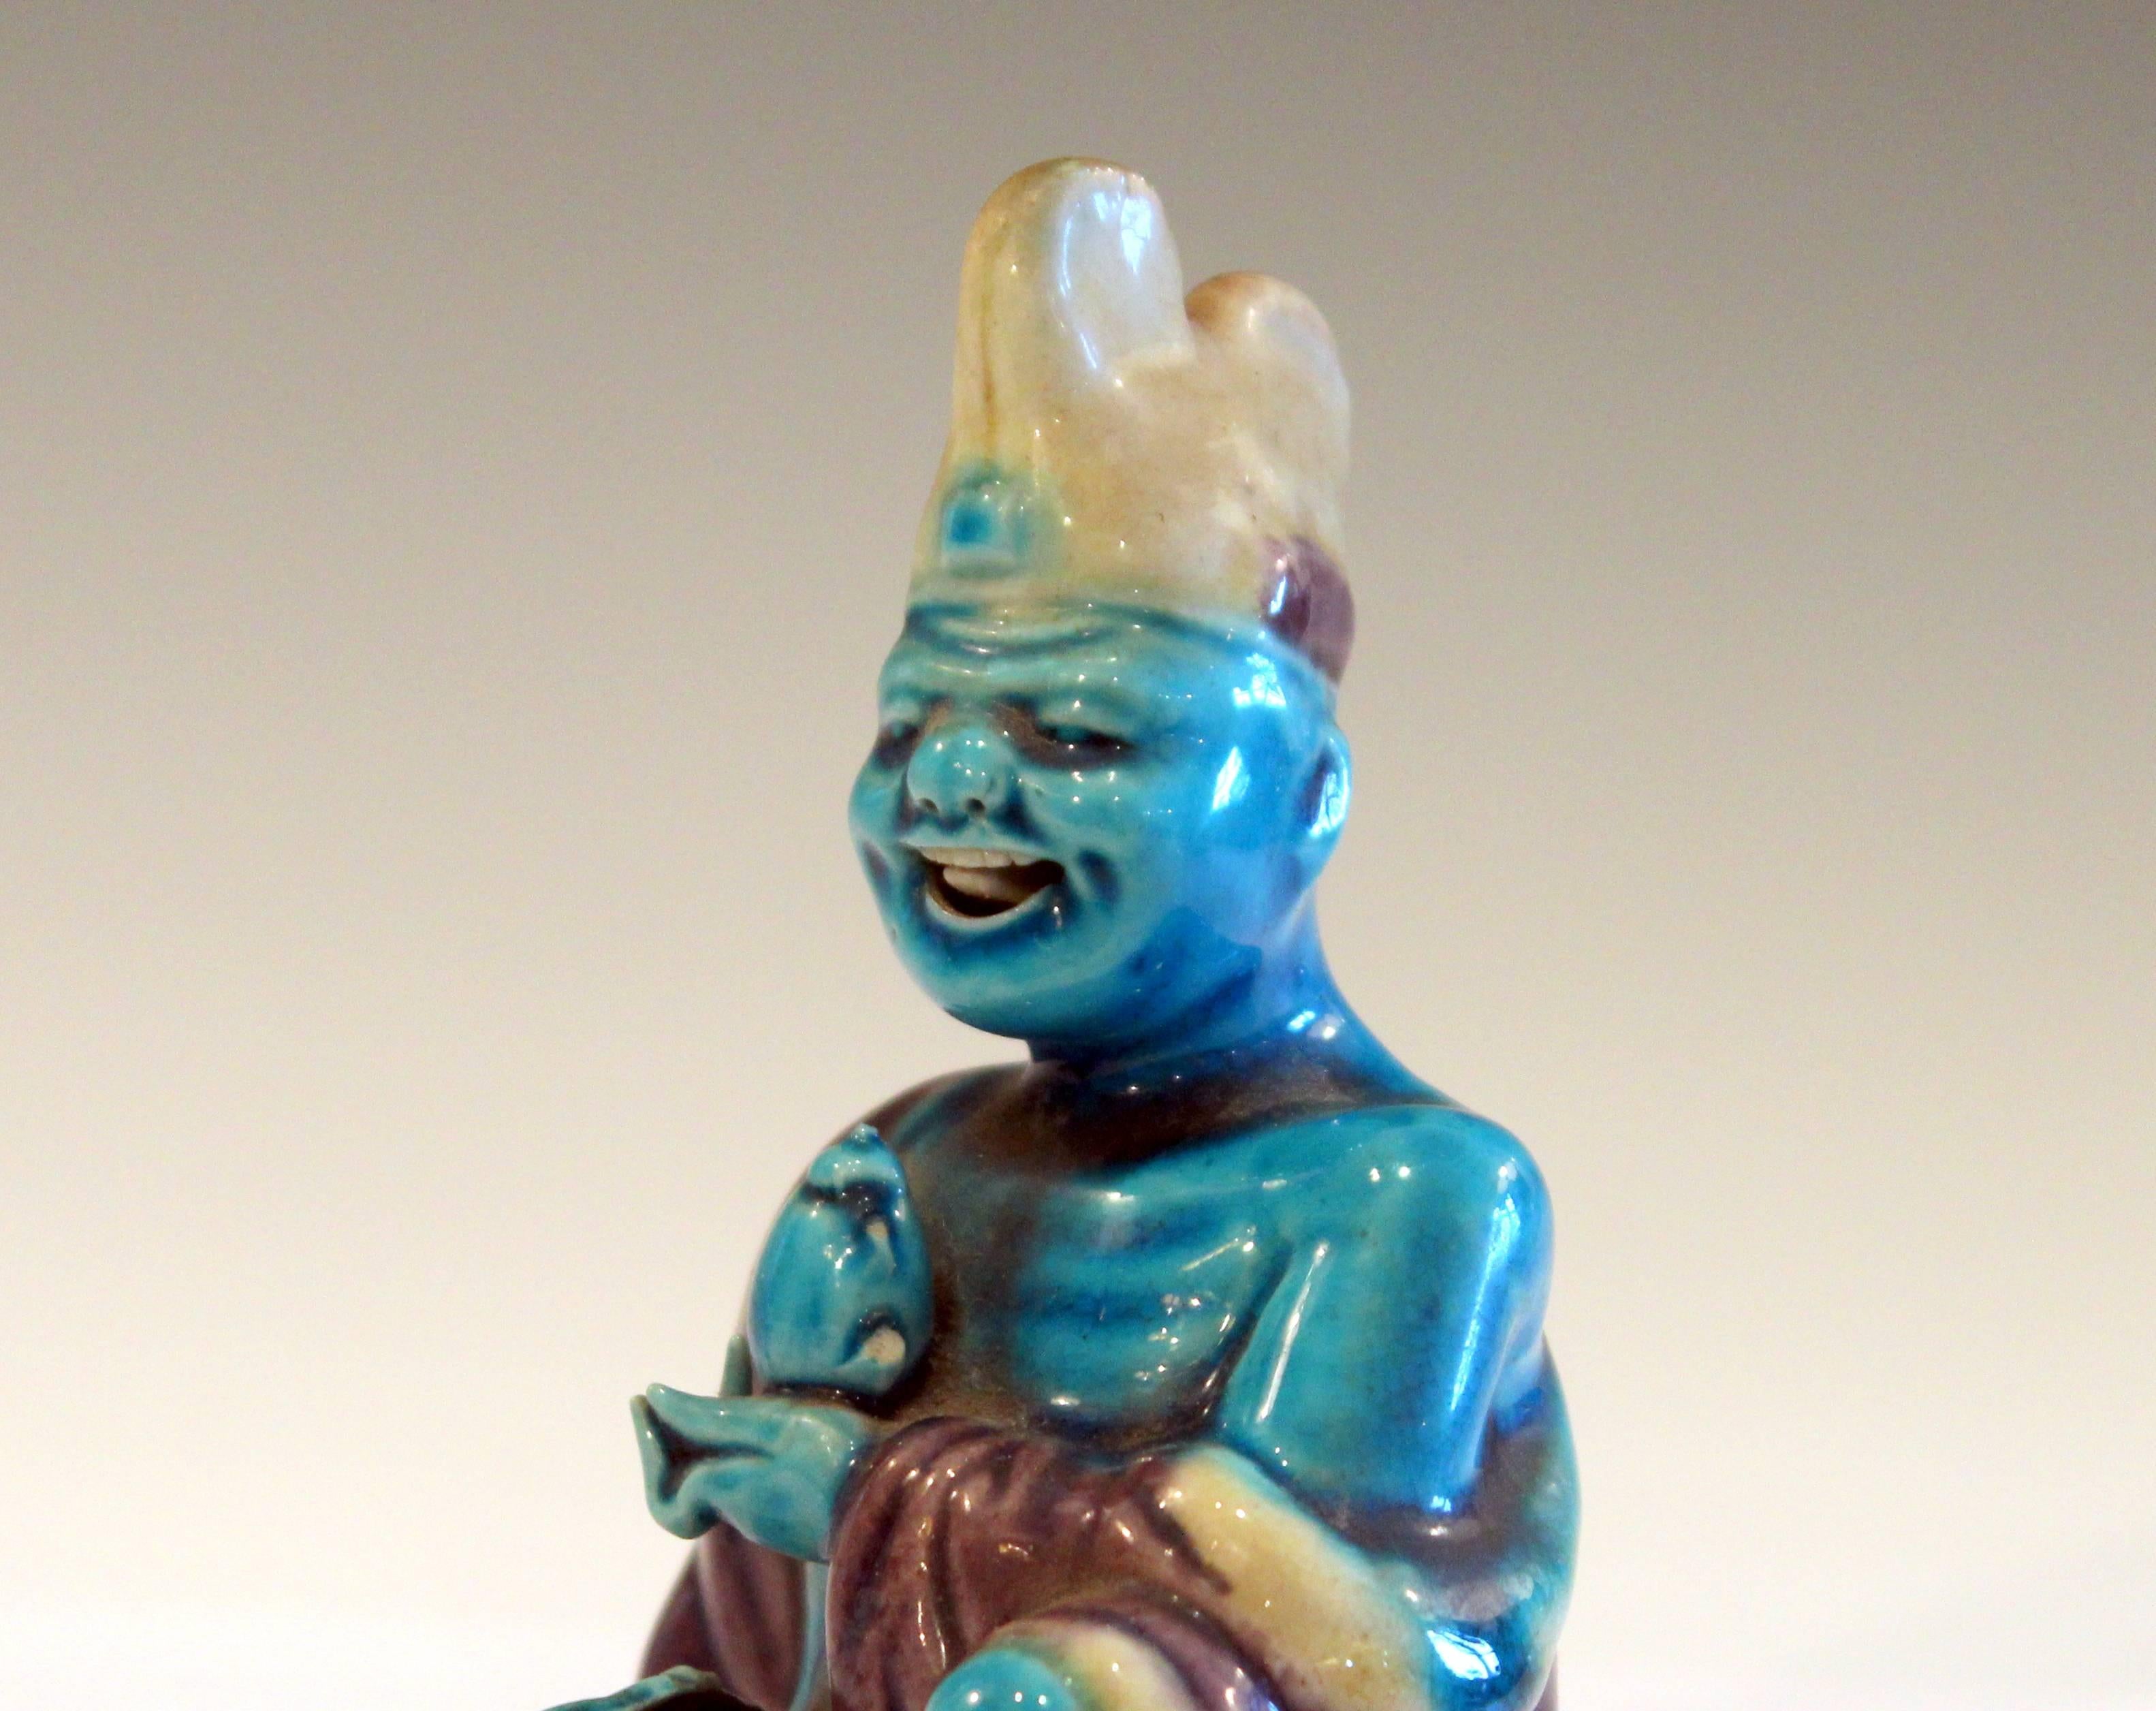 Chinese porcelain lecherous spirit figure mischief maker with bobble tongue that wags lasciviously behind an expansive grin, circa early 20th century. Figure is holding a teapot and a palm frond and wears a large double peaked hat. Measure: 4 1/2